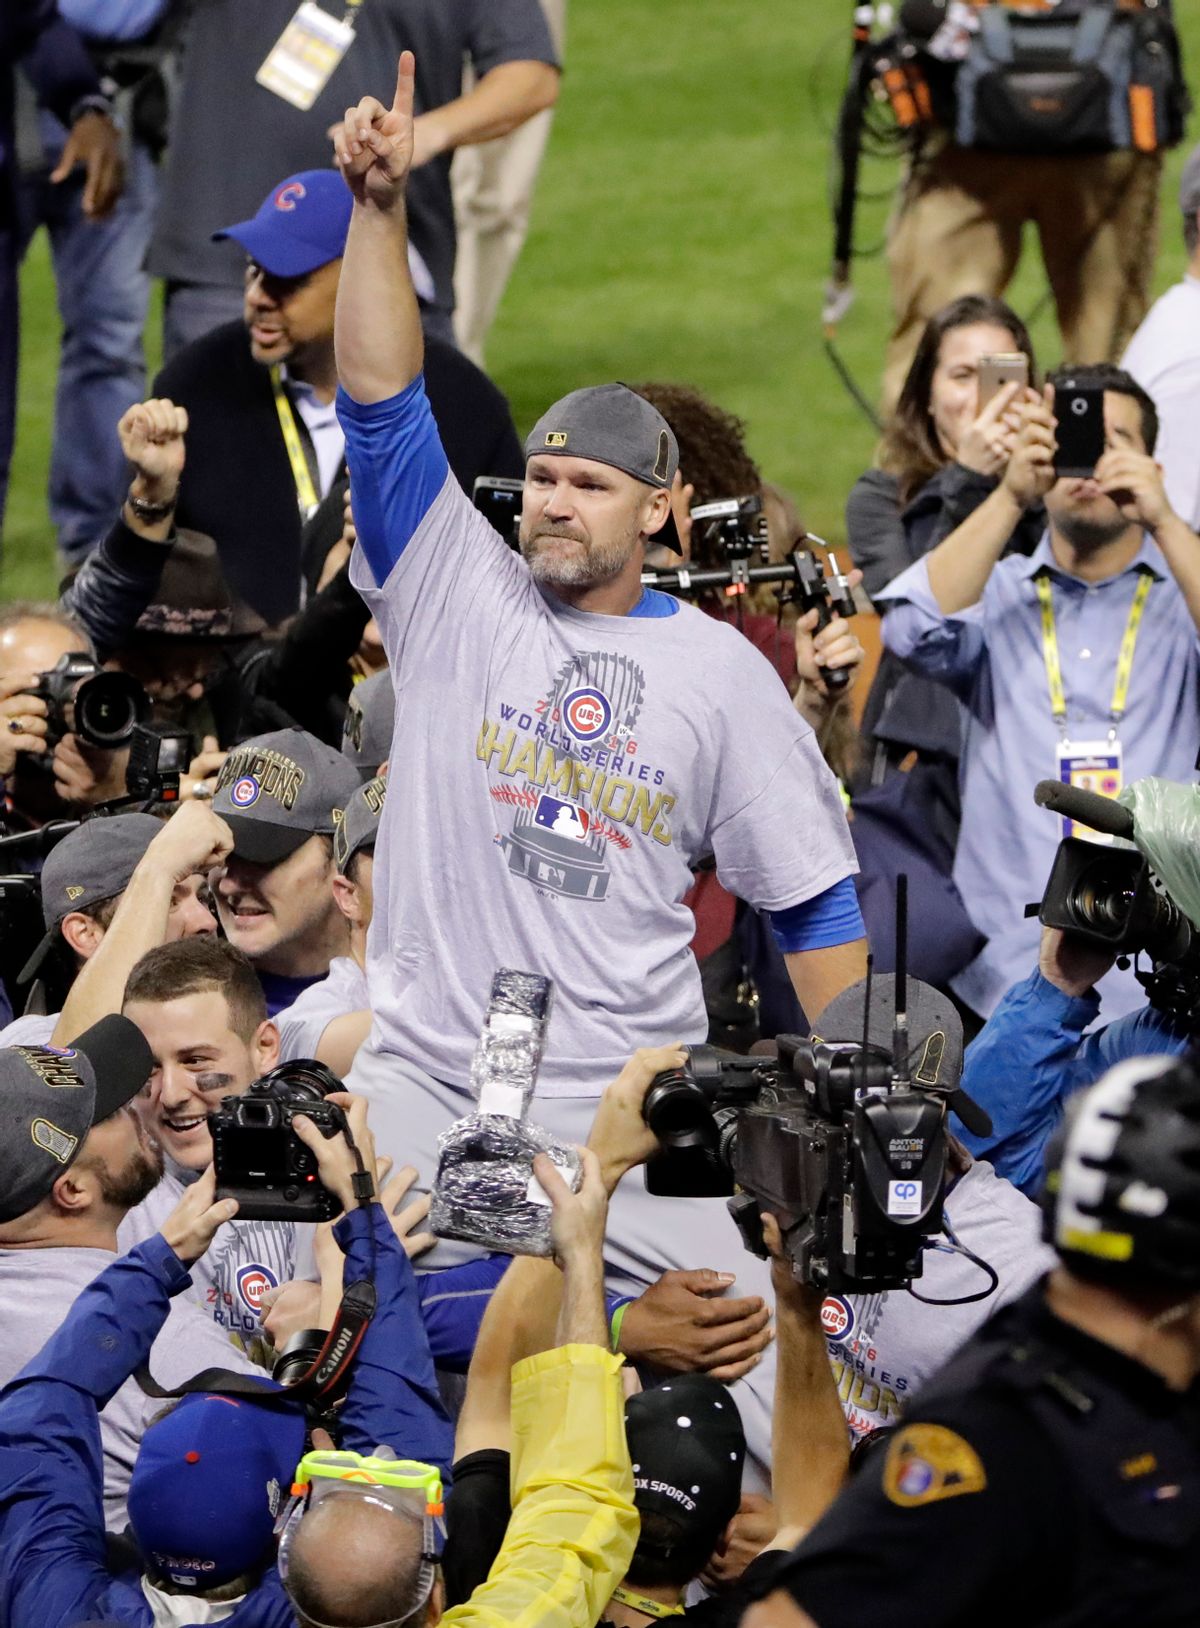 Chicago Cubs' David Ross is carried by teammates after Game 7 of the Major League Baseball World Series against the Cleveland Indians Thursday, Nov. 3, 2016, in Cleveland. The Cubs won 8-7 in 10 innings to win the series 4-3. (AP Photo/Gene J. Puskar) (AP)